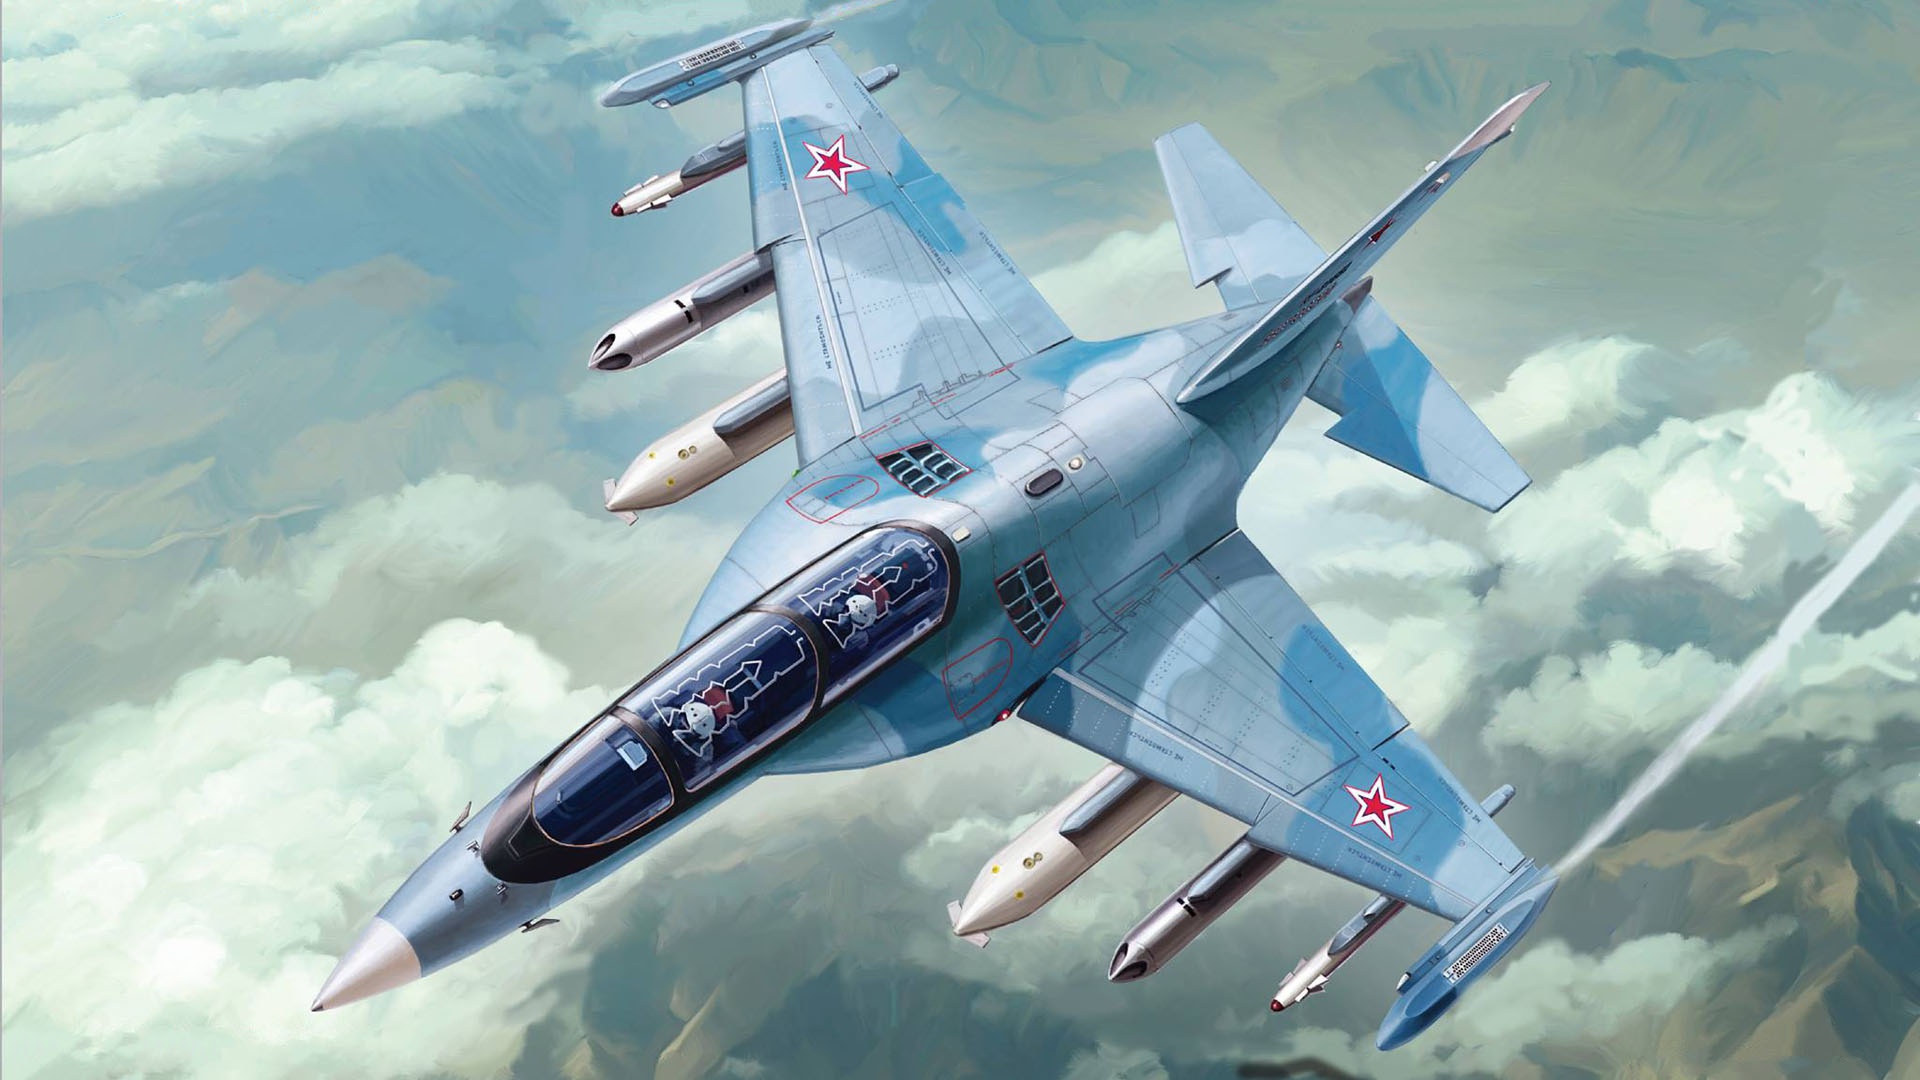 General 1920x1080 military aircraft military aircraft vehicle artwork Yakovlev Yak-130 Russian Air Force jets jet fighter wingtip vortices Russian/Soviet aircraft Yakovlev